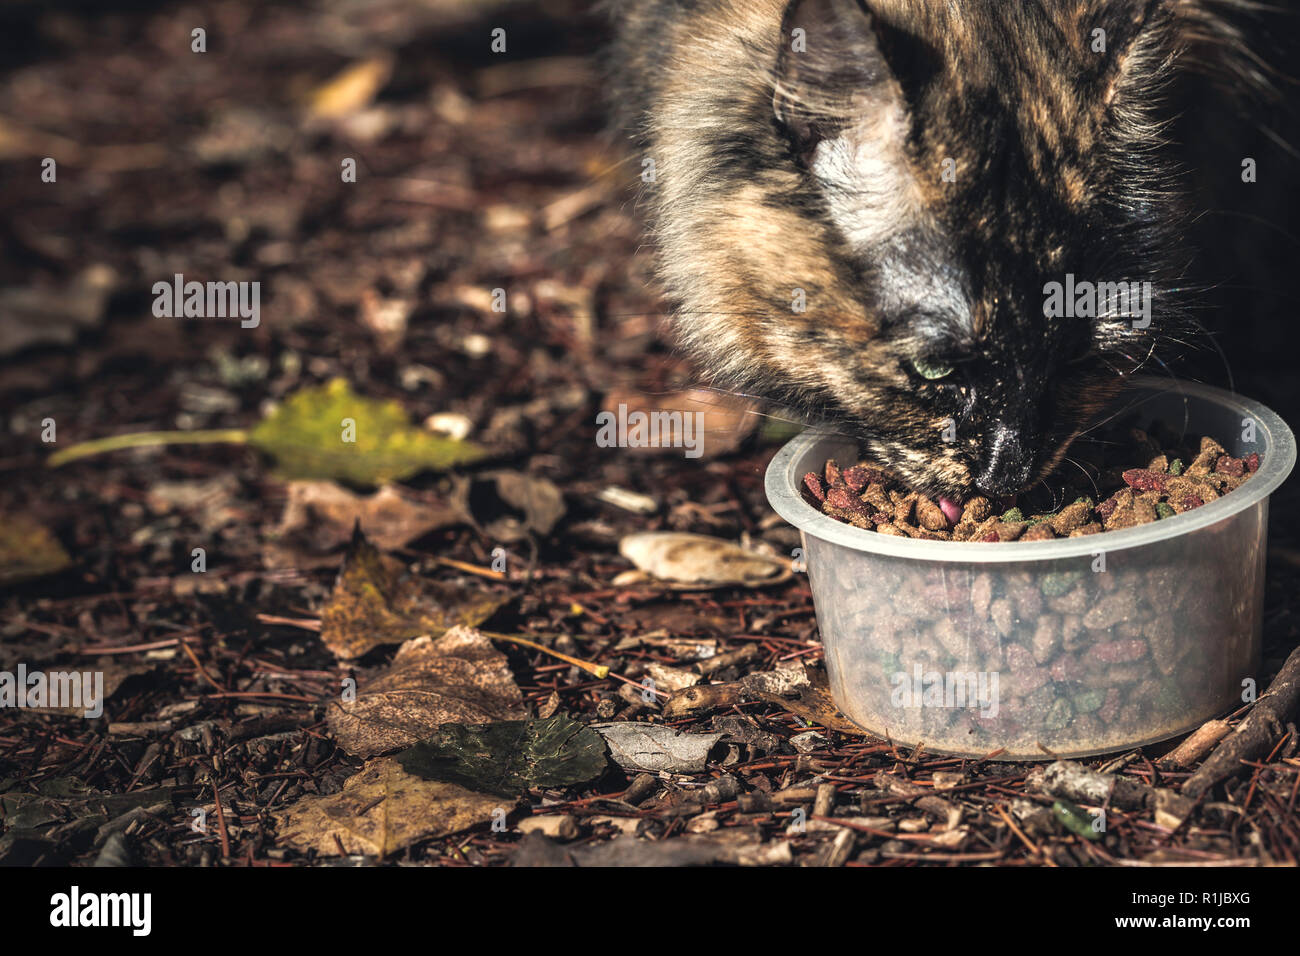 Pretty cat eating in the plastic bowl on the forest floor Stock Photo